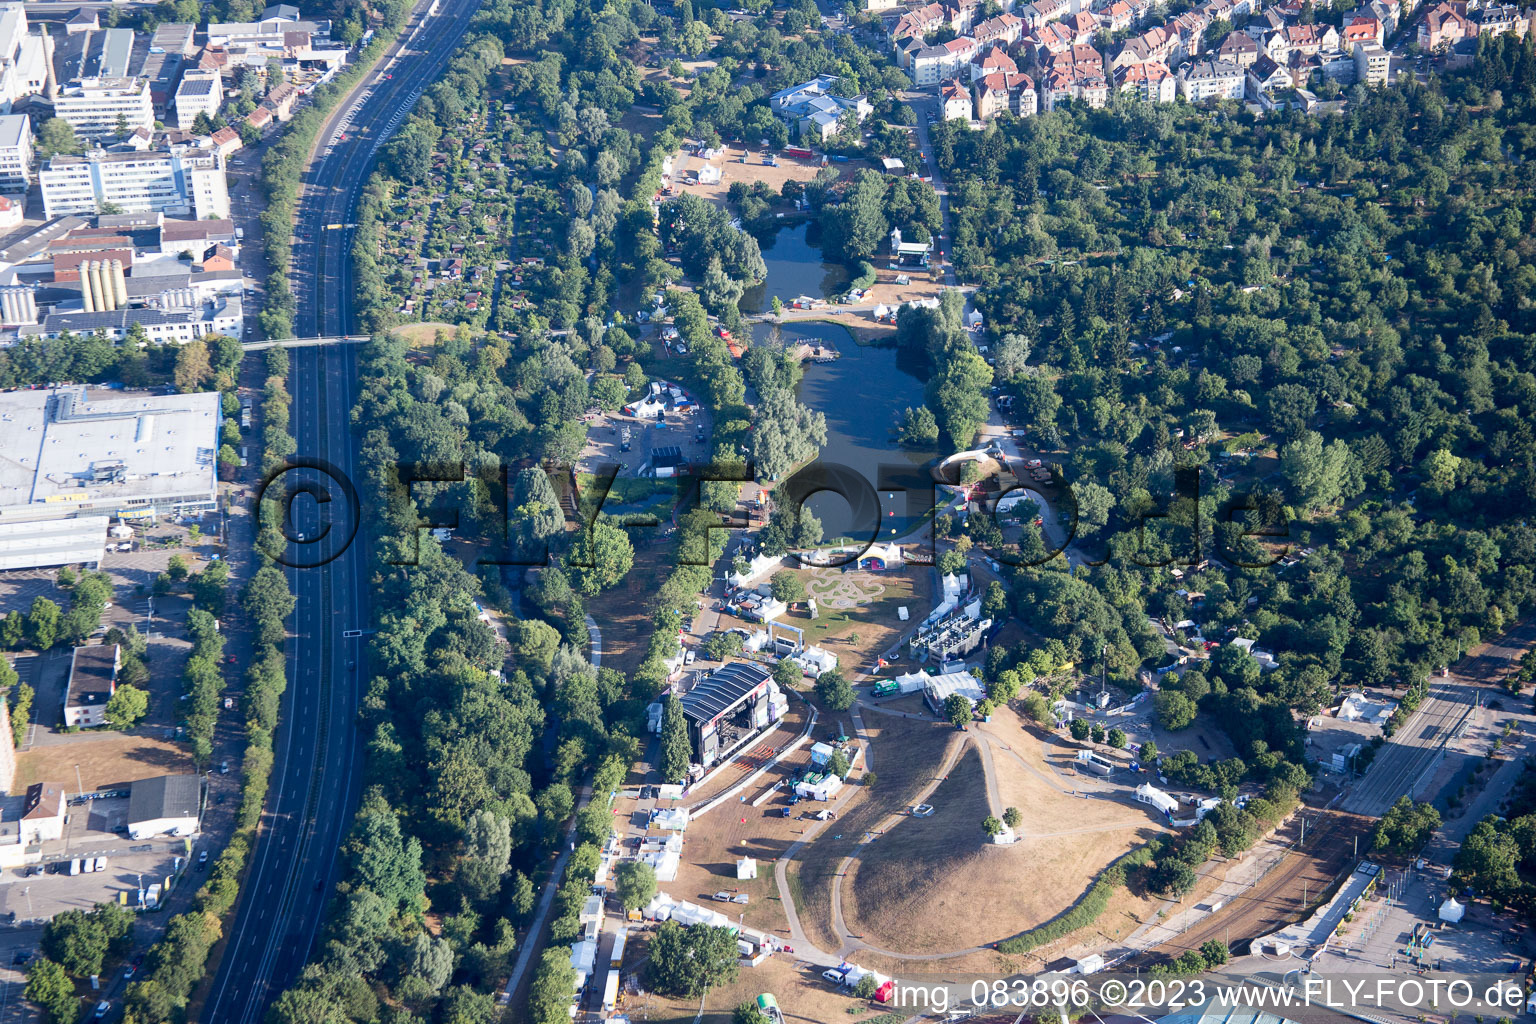 Aerial photograpy of The festival in the Günther Klotz facility in the district Südweststadt in Karlsruhe in the state Baden-Wuerttemberg, Germany